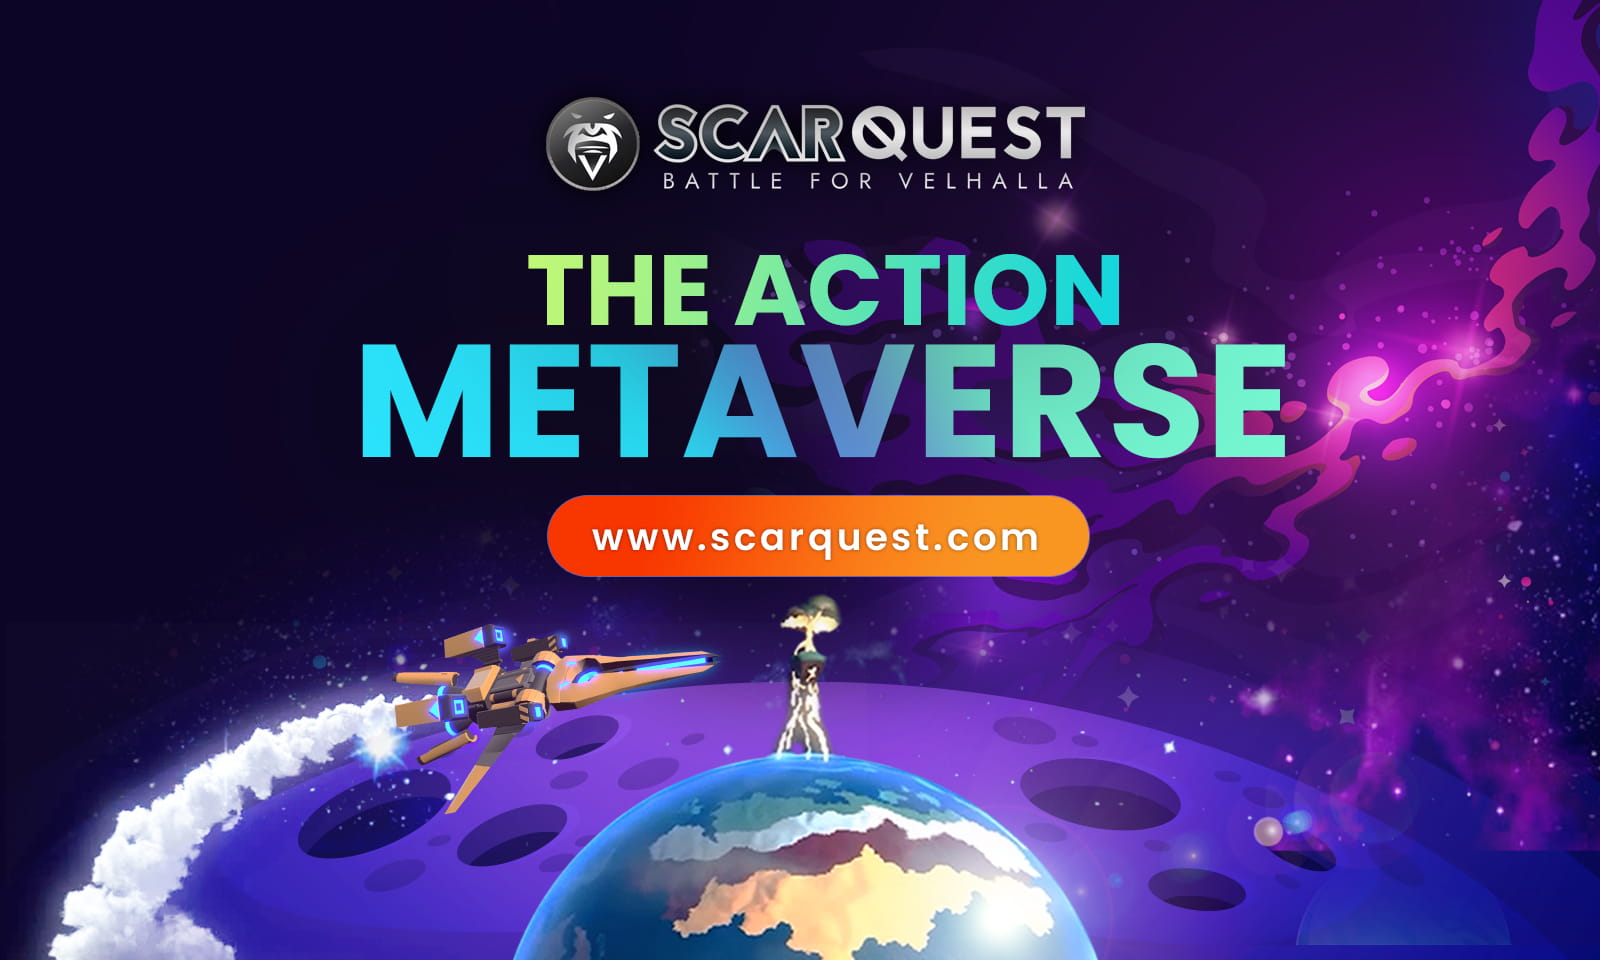 Web3 Gaming Goldrush: ScarQuest Early Entry Advantage!